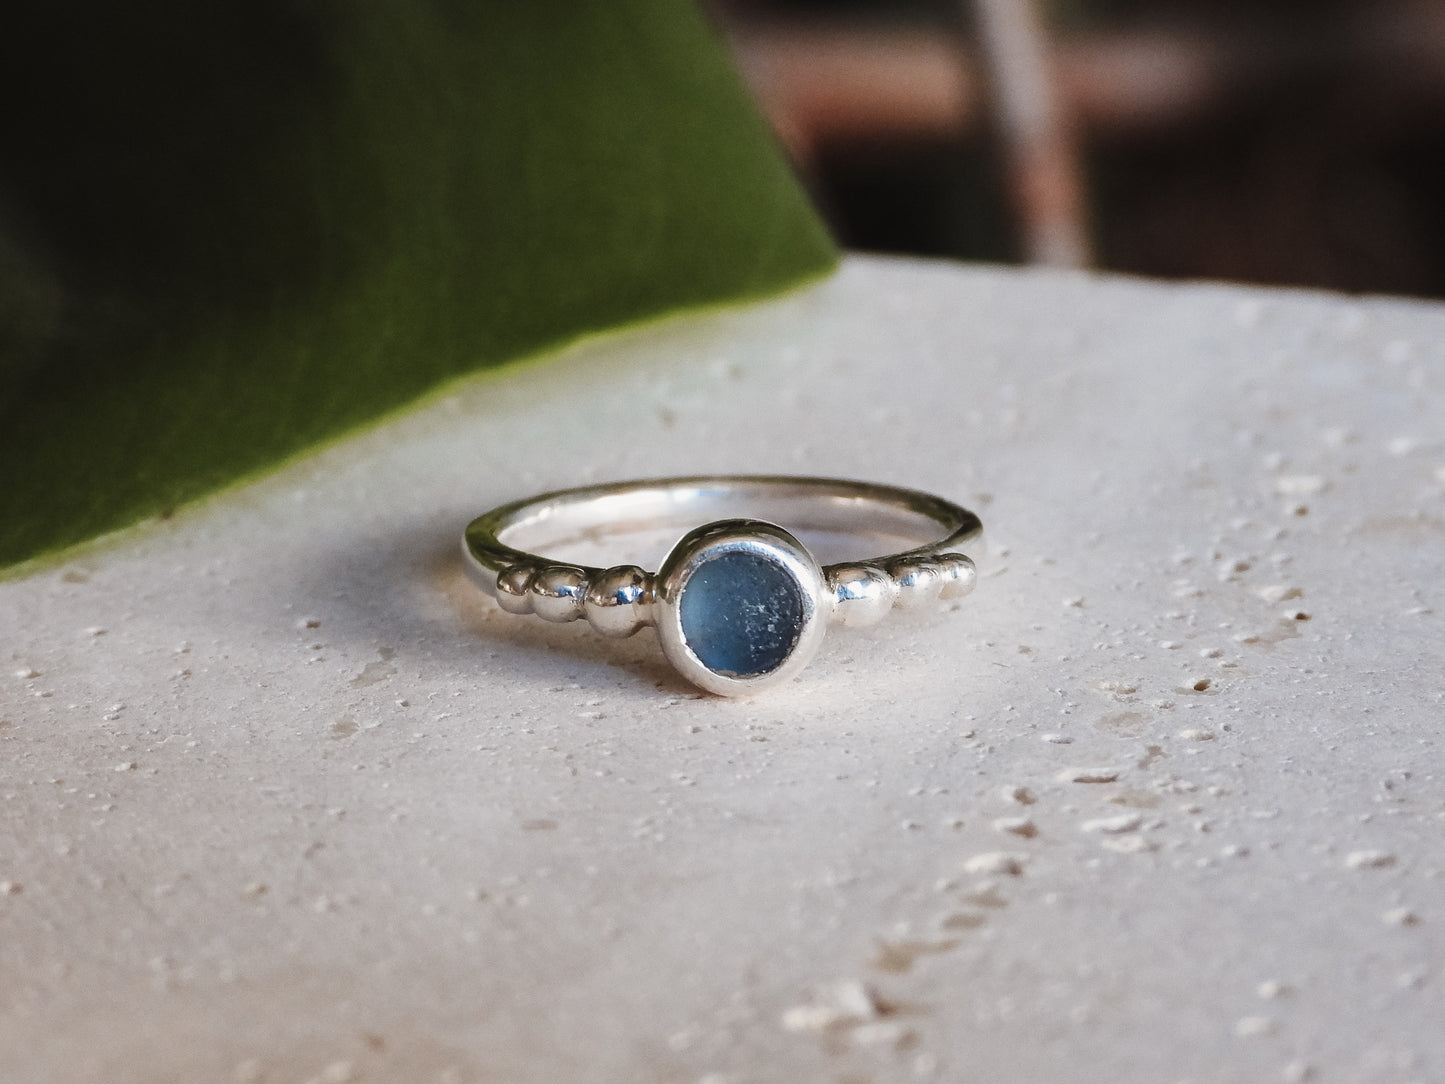 Blue cornish seaglass engagment ring with sterling silver 